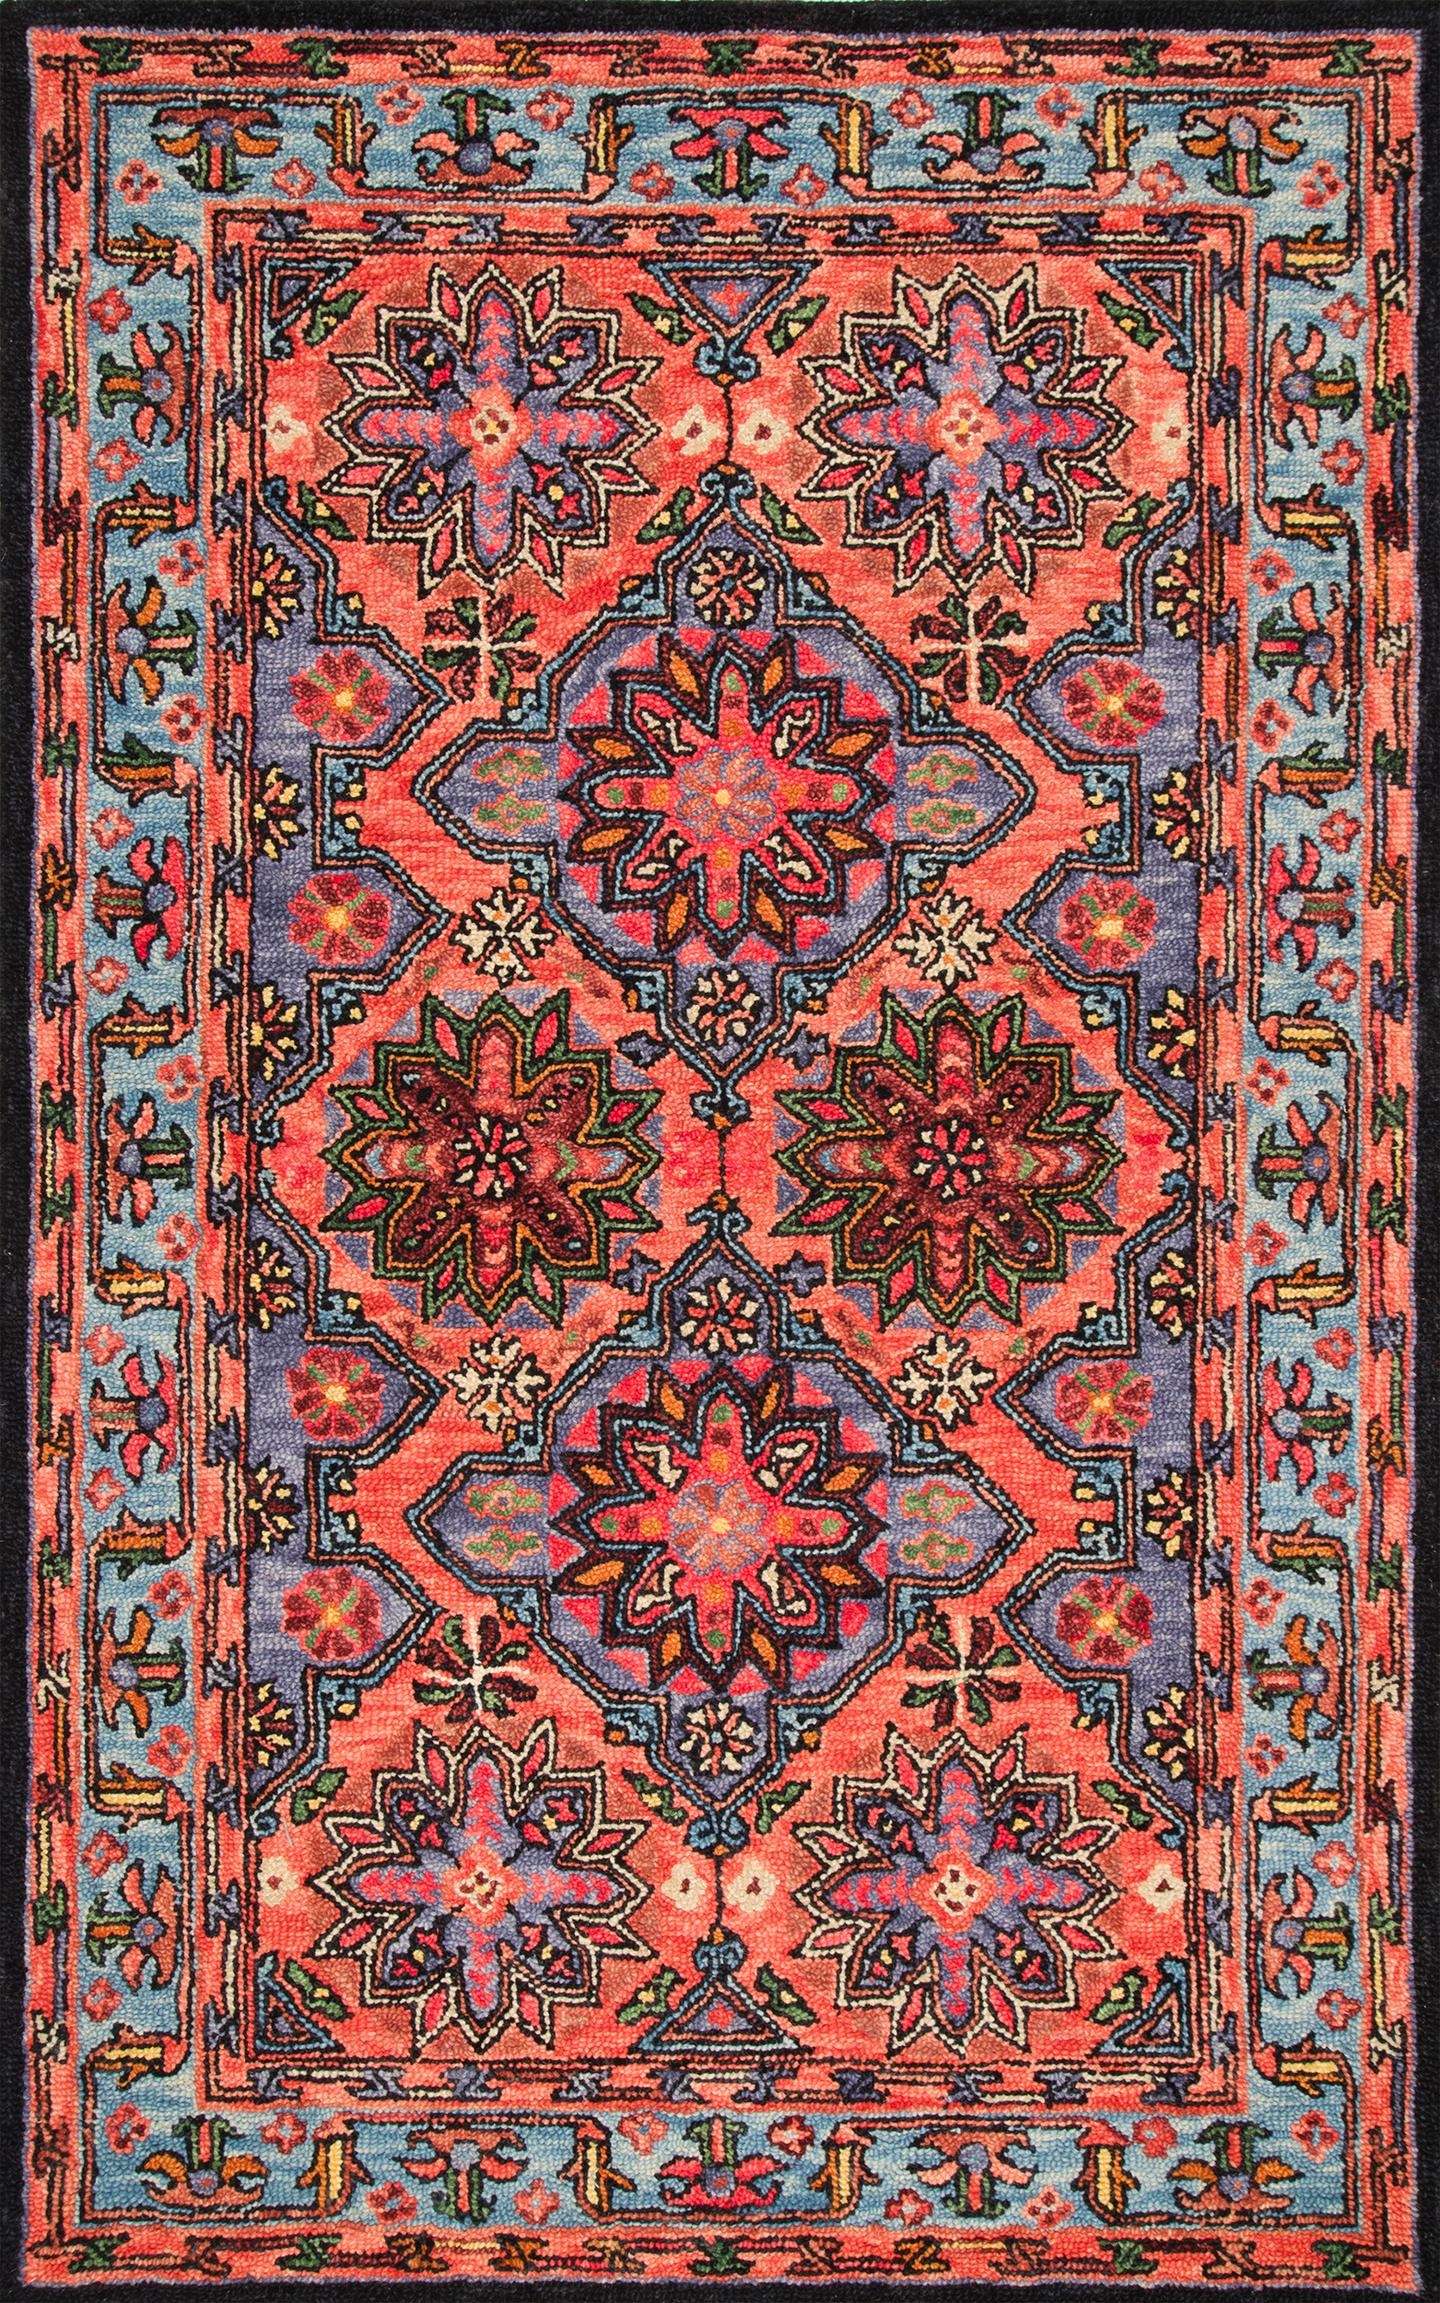 Traditional Yvonne Floral Area Rug - Image 1